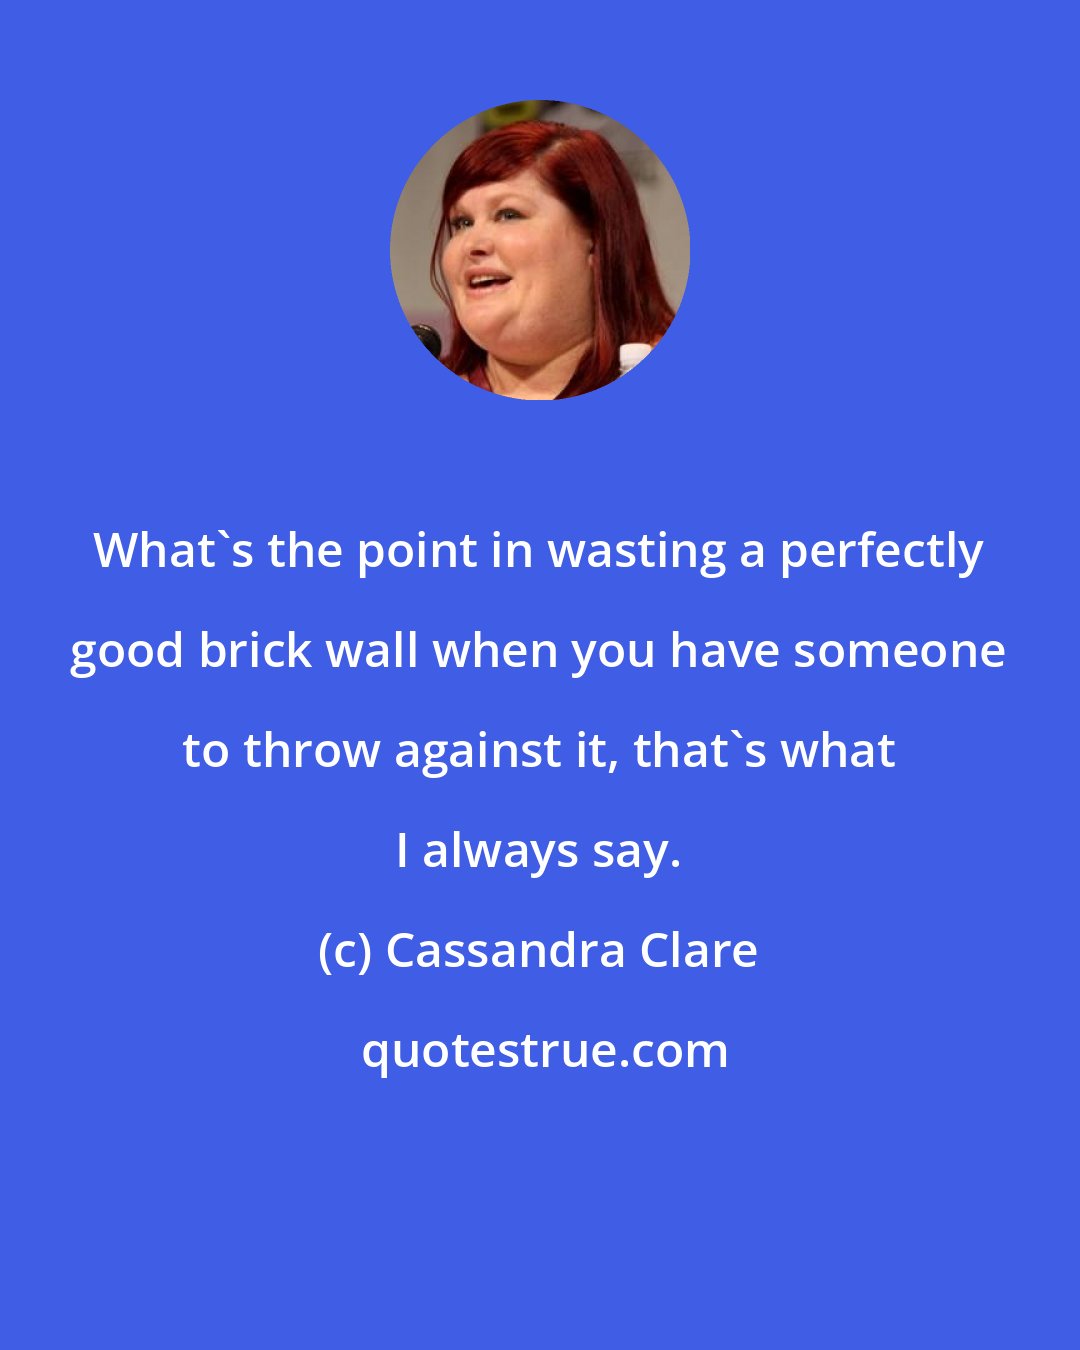 Cassandra Clare: What's the point in wasting a perfectly good brick wall when you have someone to throw against it, that's what I always say.